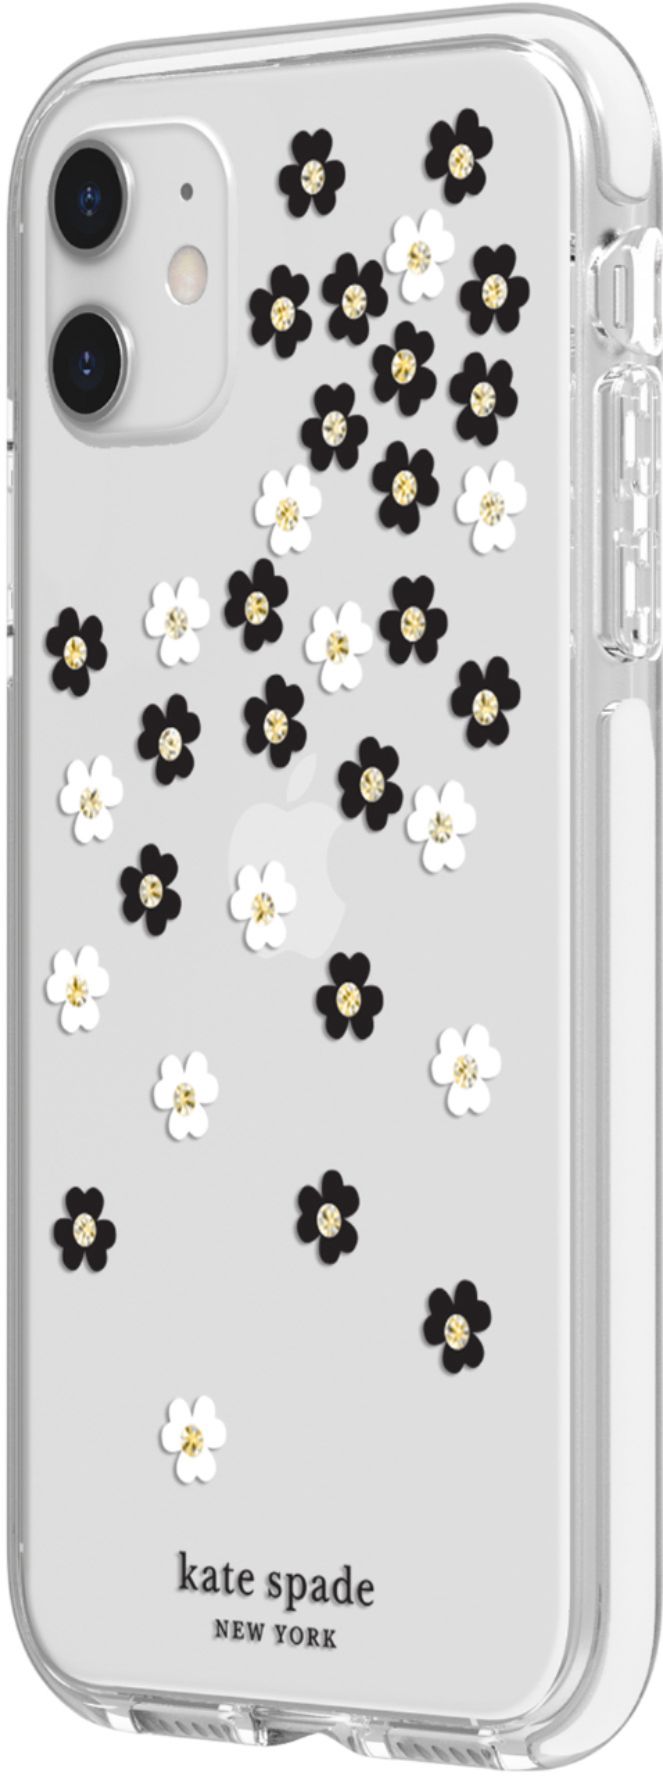 Left View: kate spade new york - Defensive Hardshell Case for Apple® iPhone® 11 - White/Clear/Scattered Flowers Black/Gold Gems